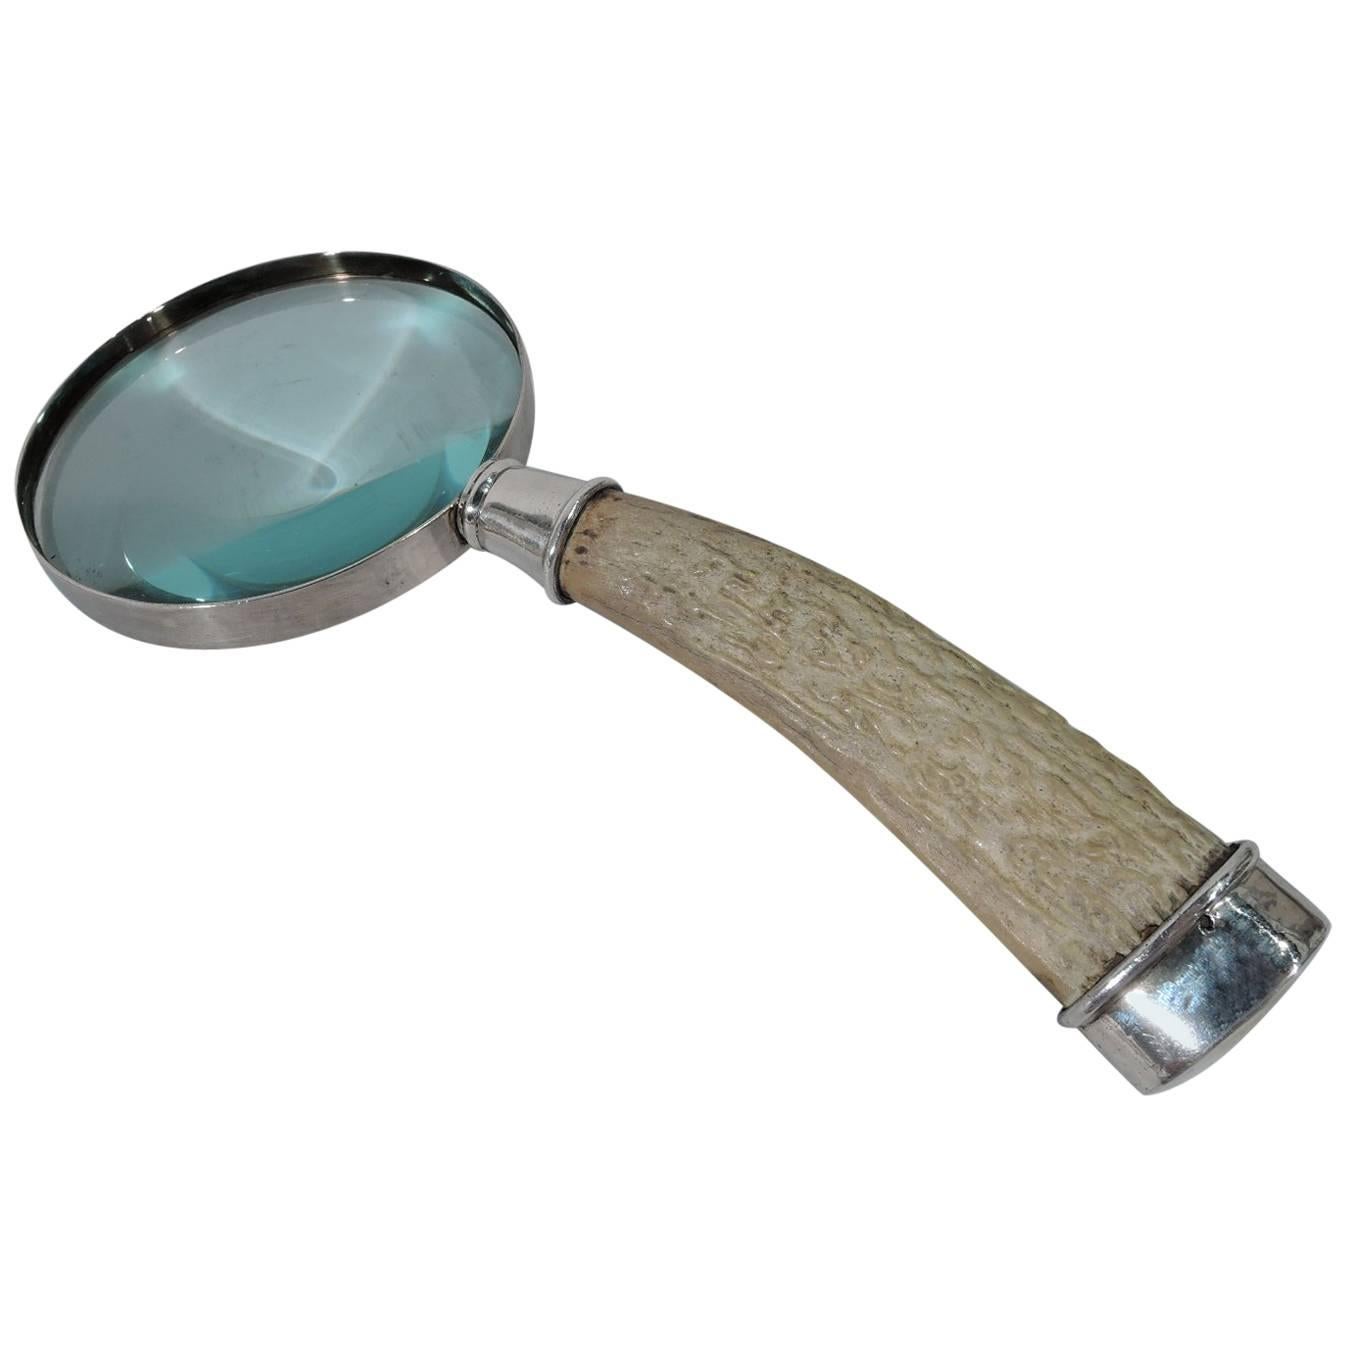 American Big Game Sterling Silver Magnifying Glass with Horn Handle